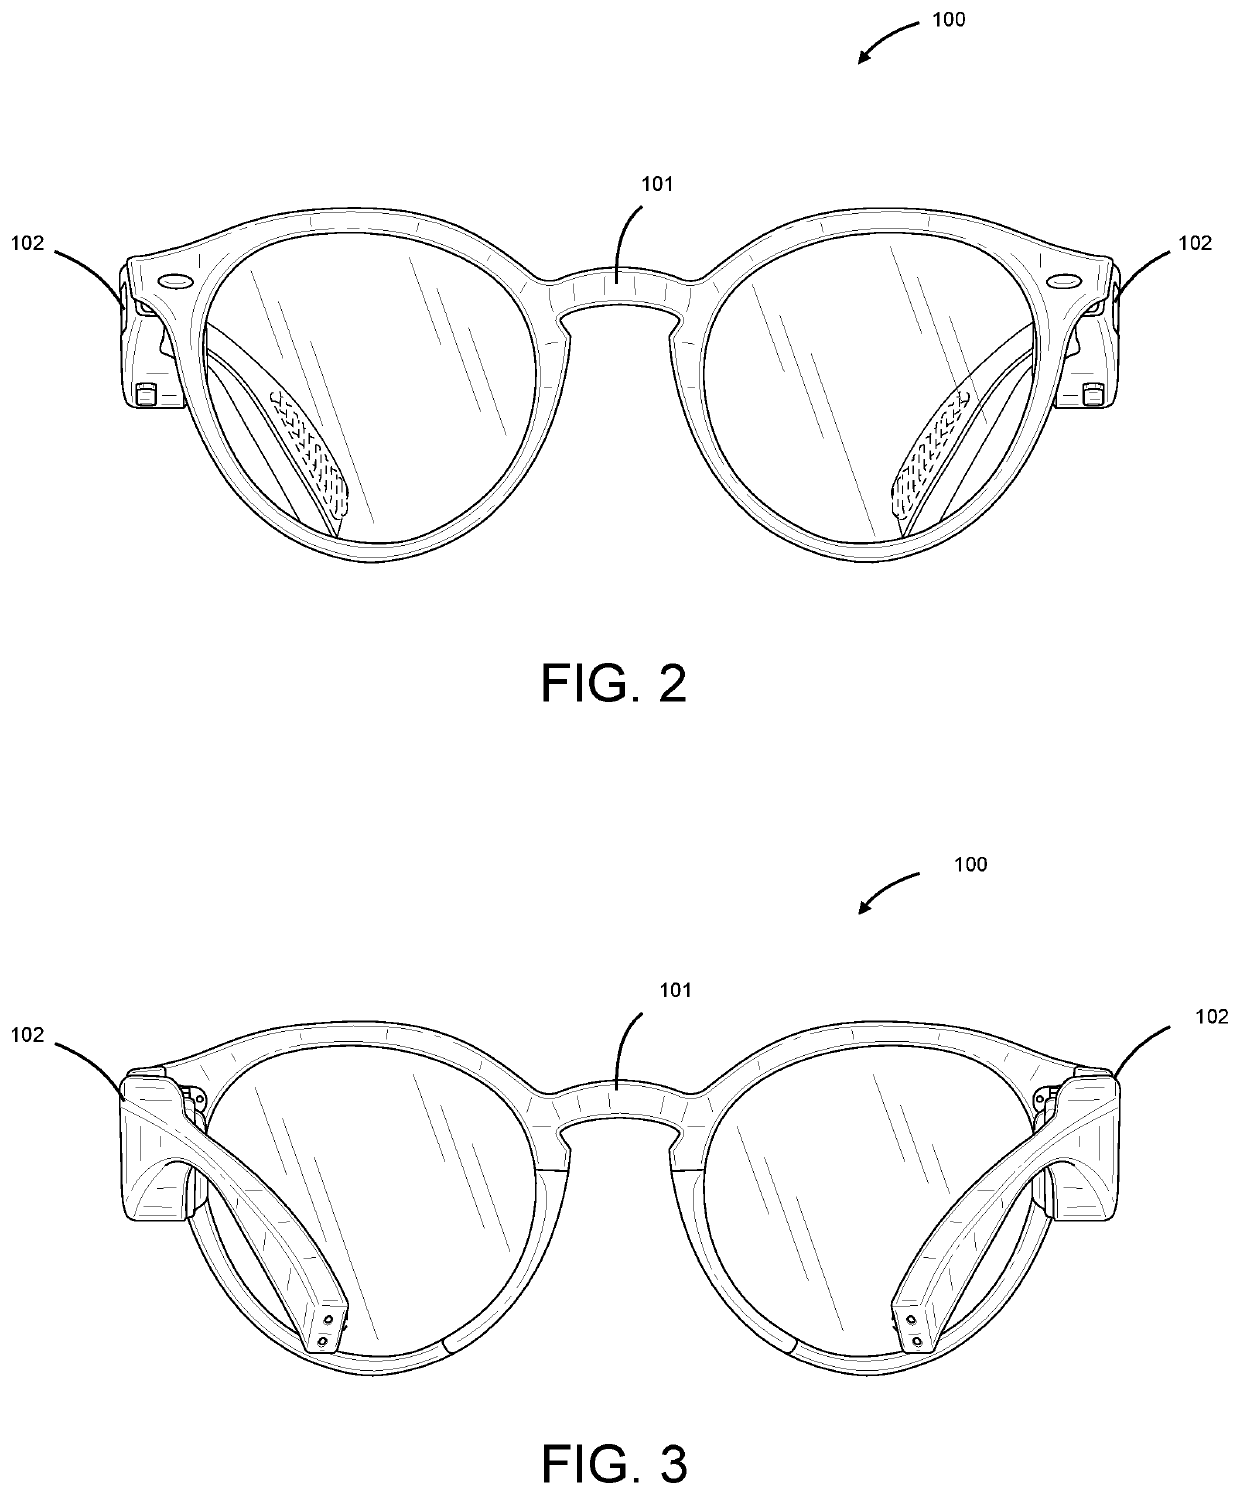 Wireless Smartglasses with Quick Connect Front Frames